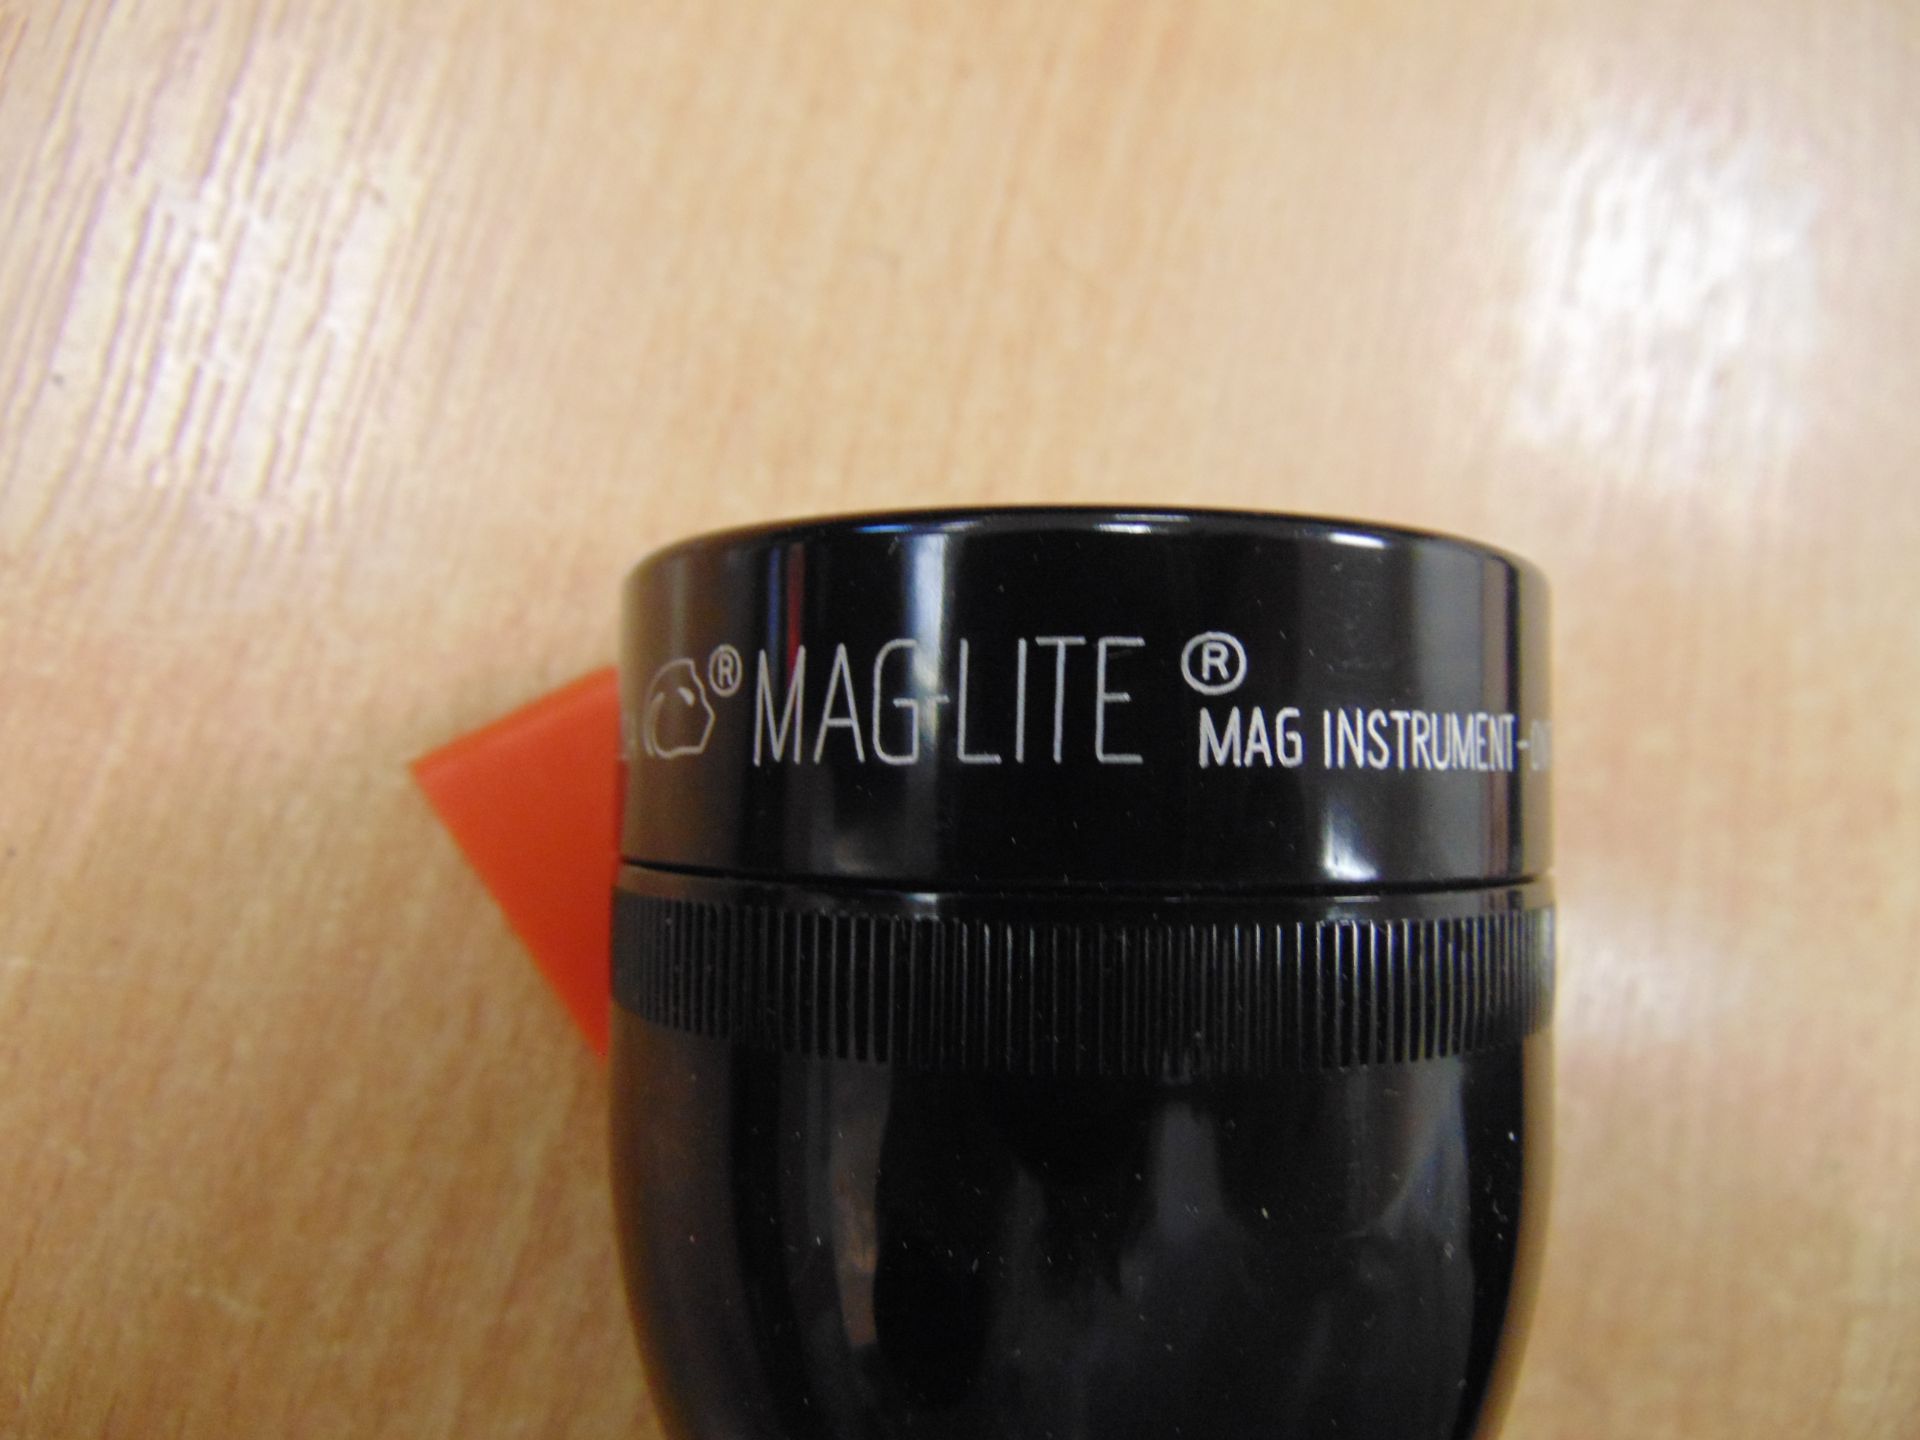 NEW UNISSUED MAGLITE TORCH BRITISH ARMY ISSUE - Image 4 of 5